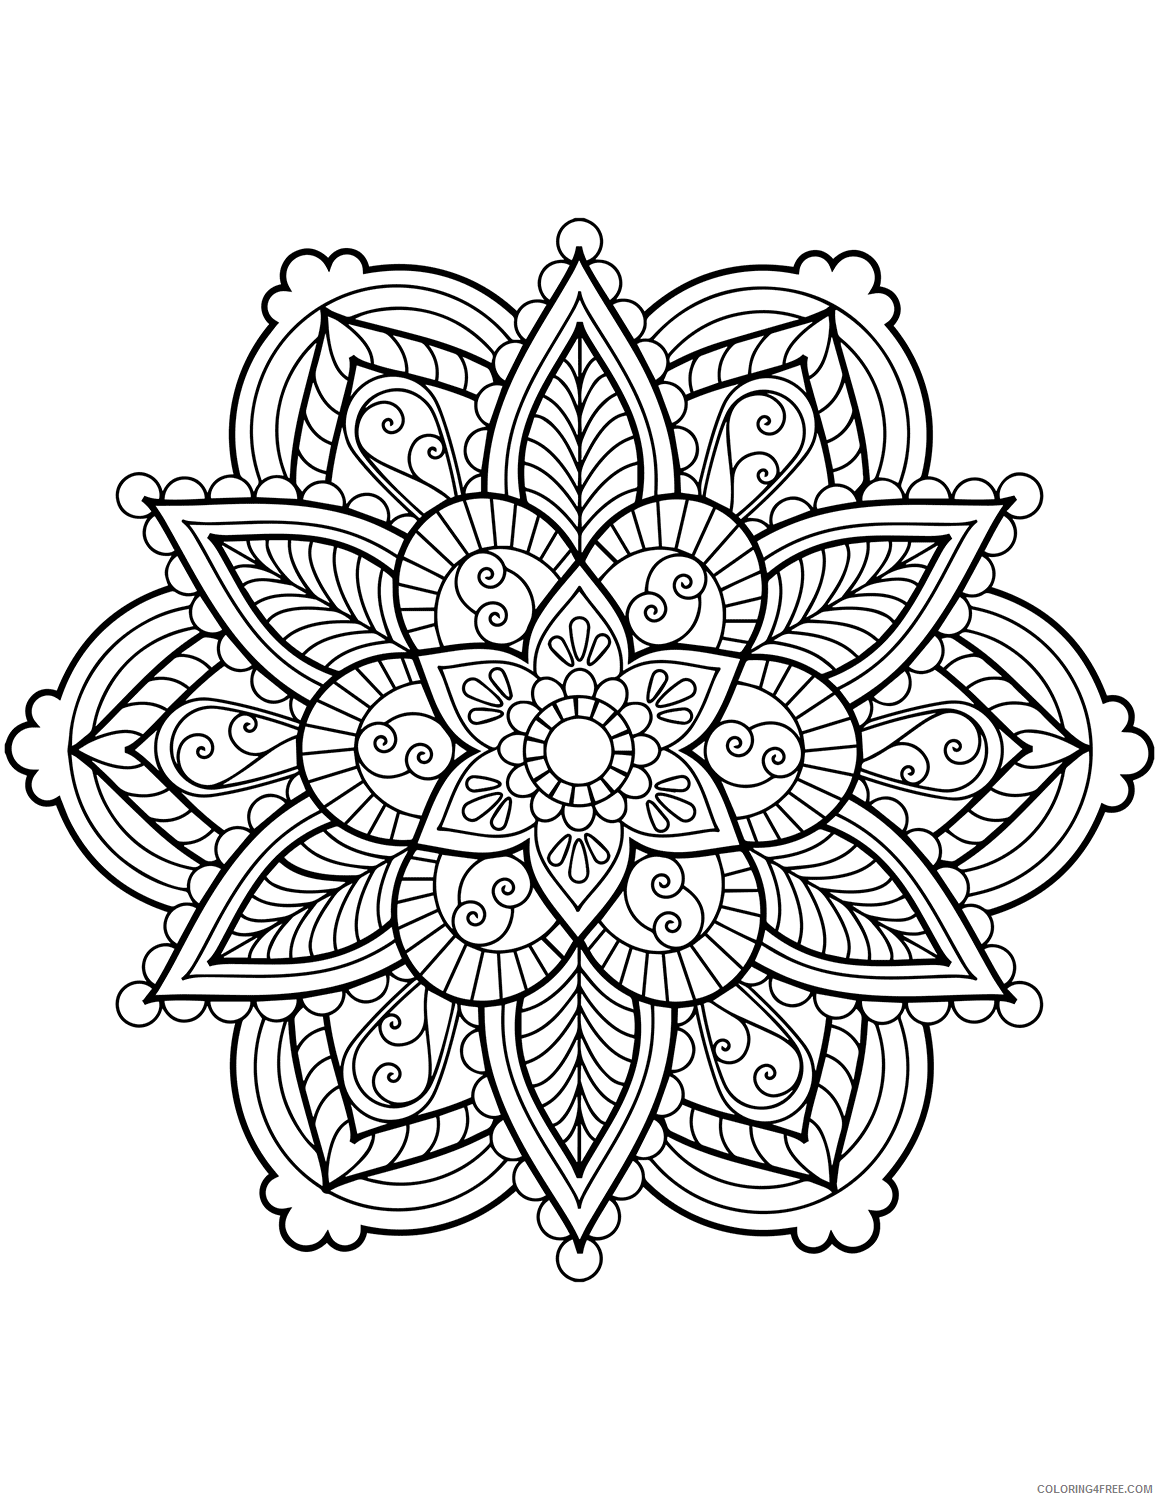 Mandala Flower Coloring Pages Flowers Nature Free Flower Printable 2021 270 Coloring4free